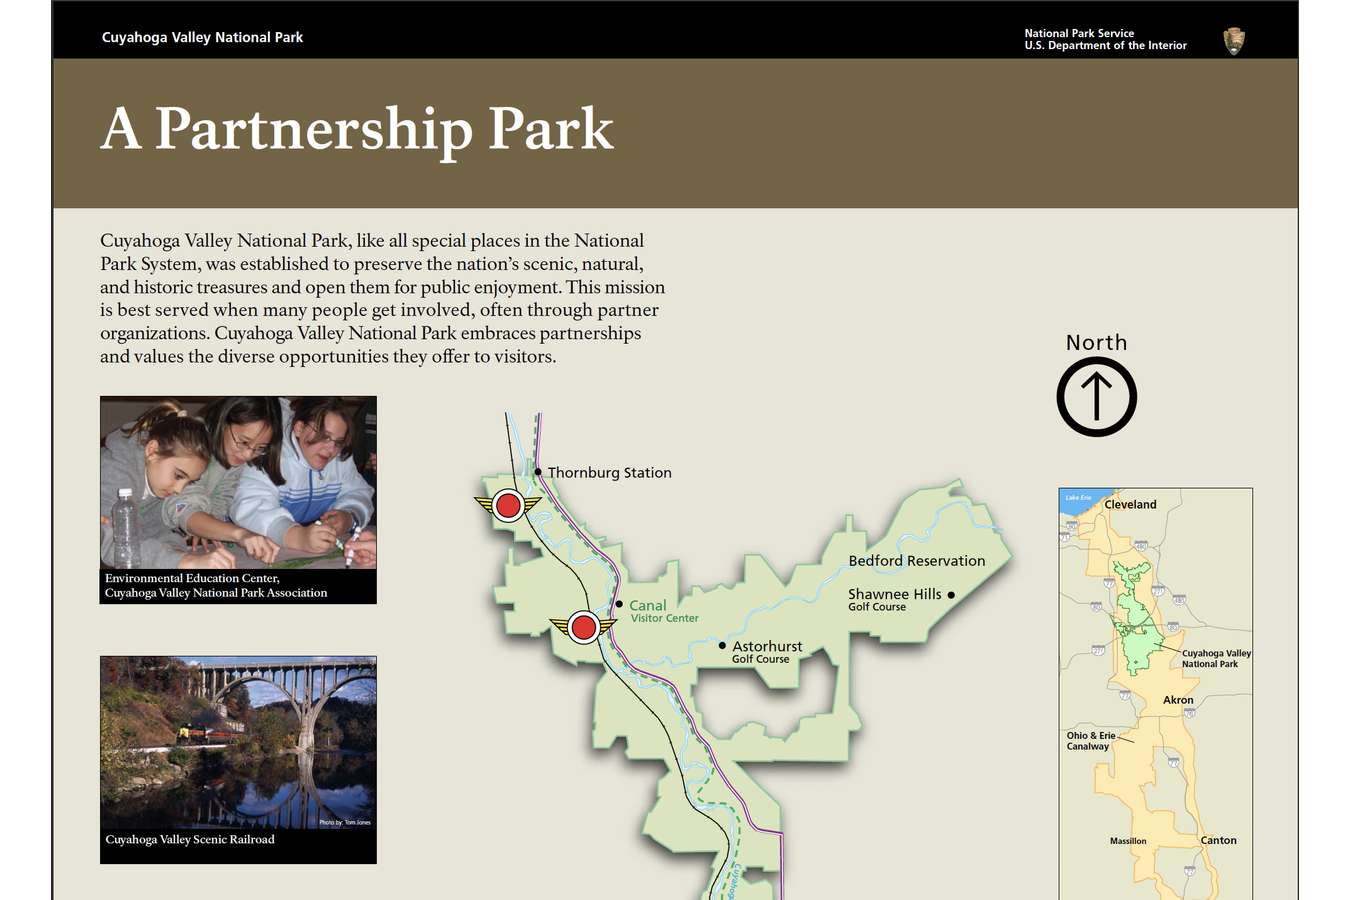 CUVANPS6 : The partnership proposition is a successful way for parks to increase revenue and attendance